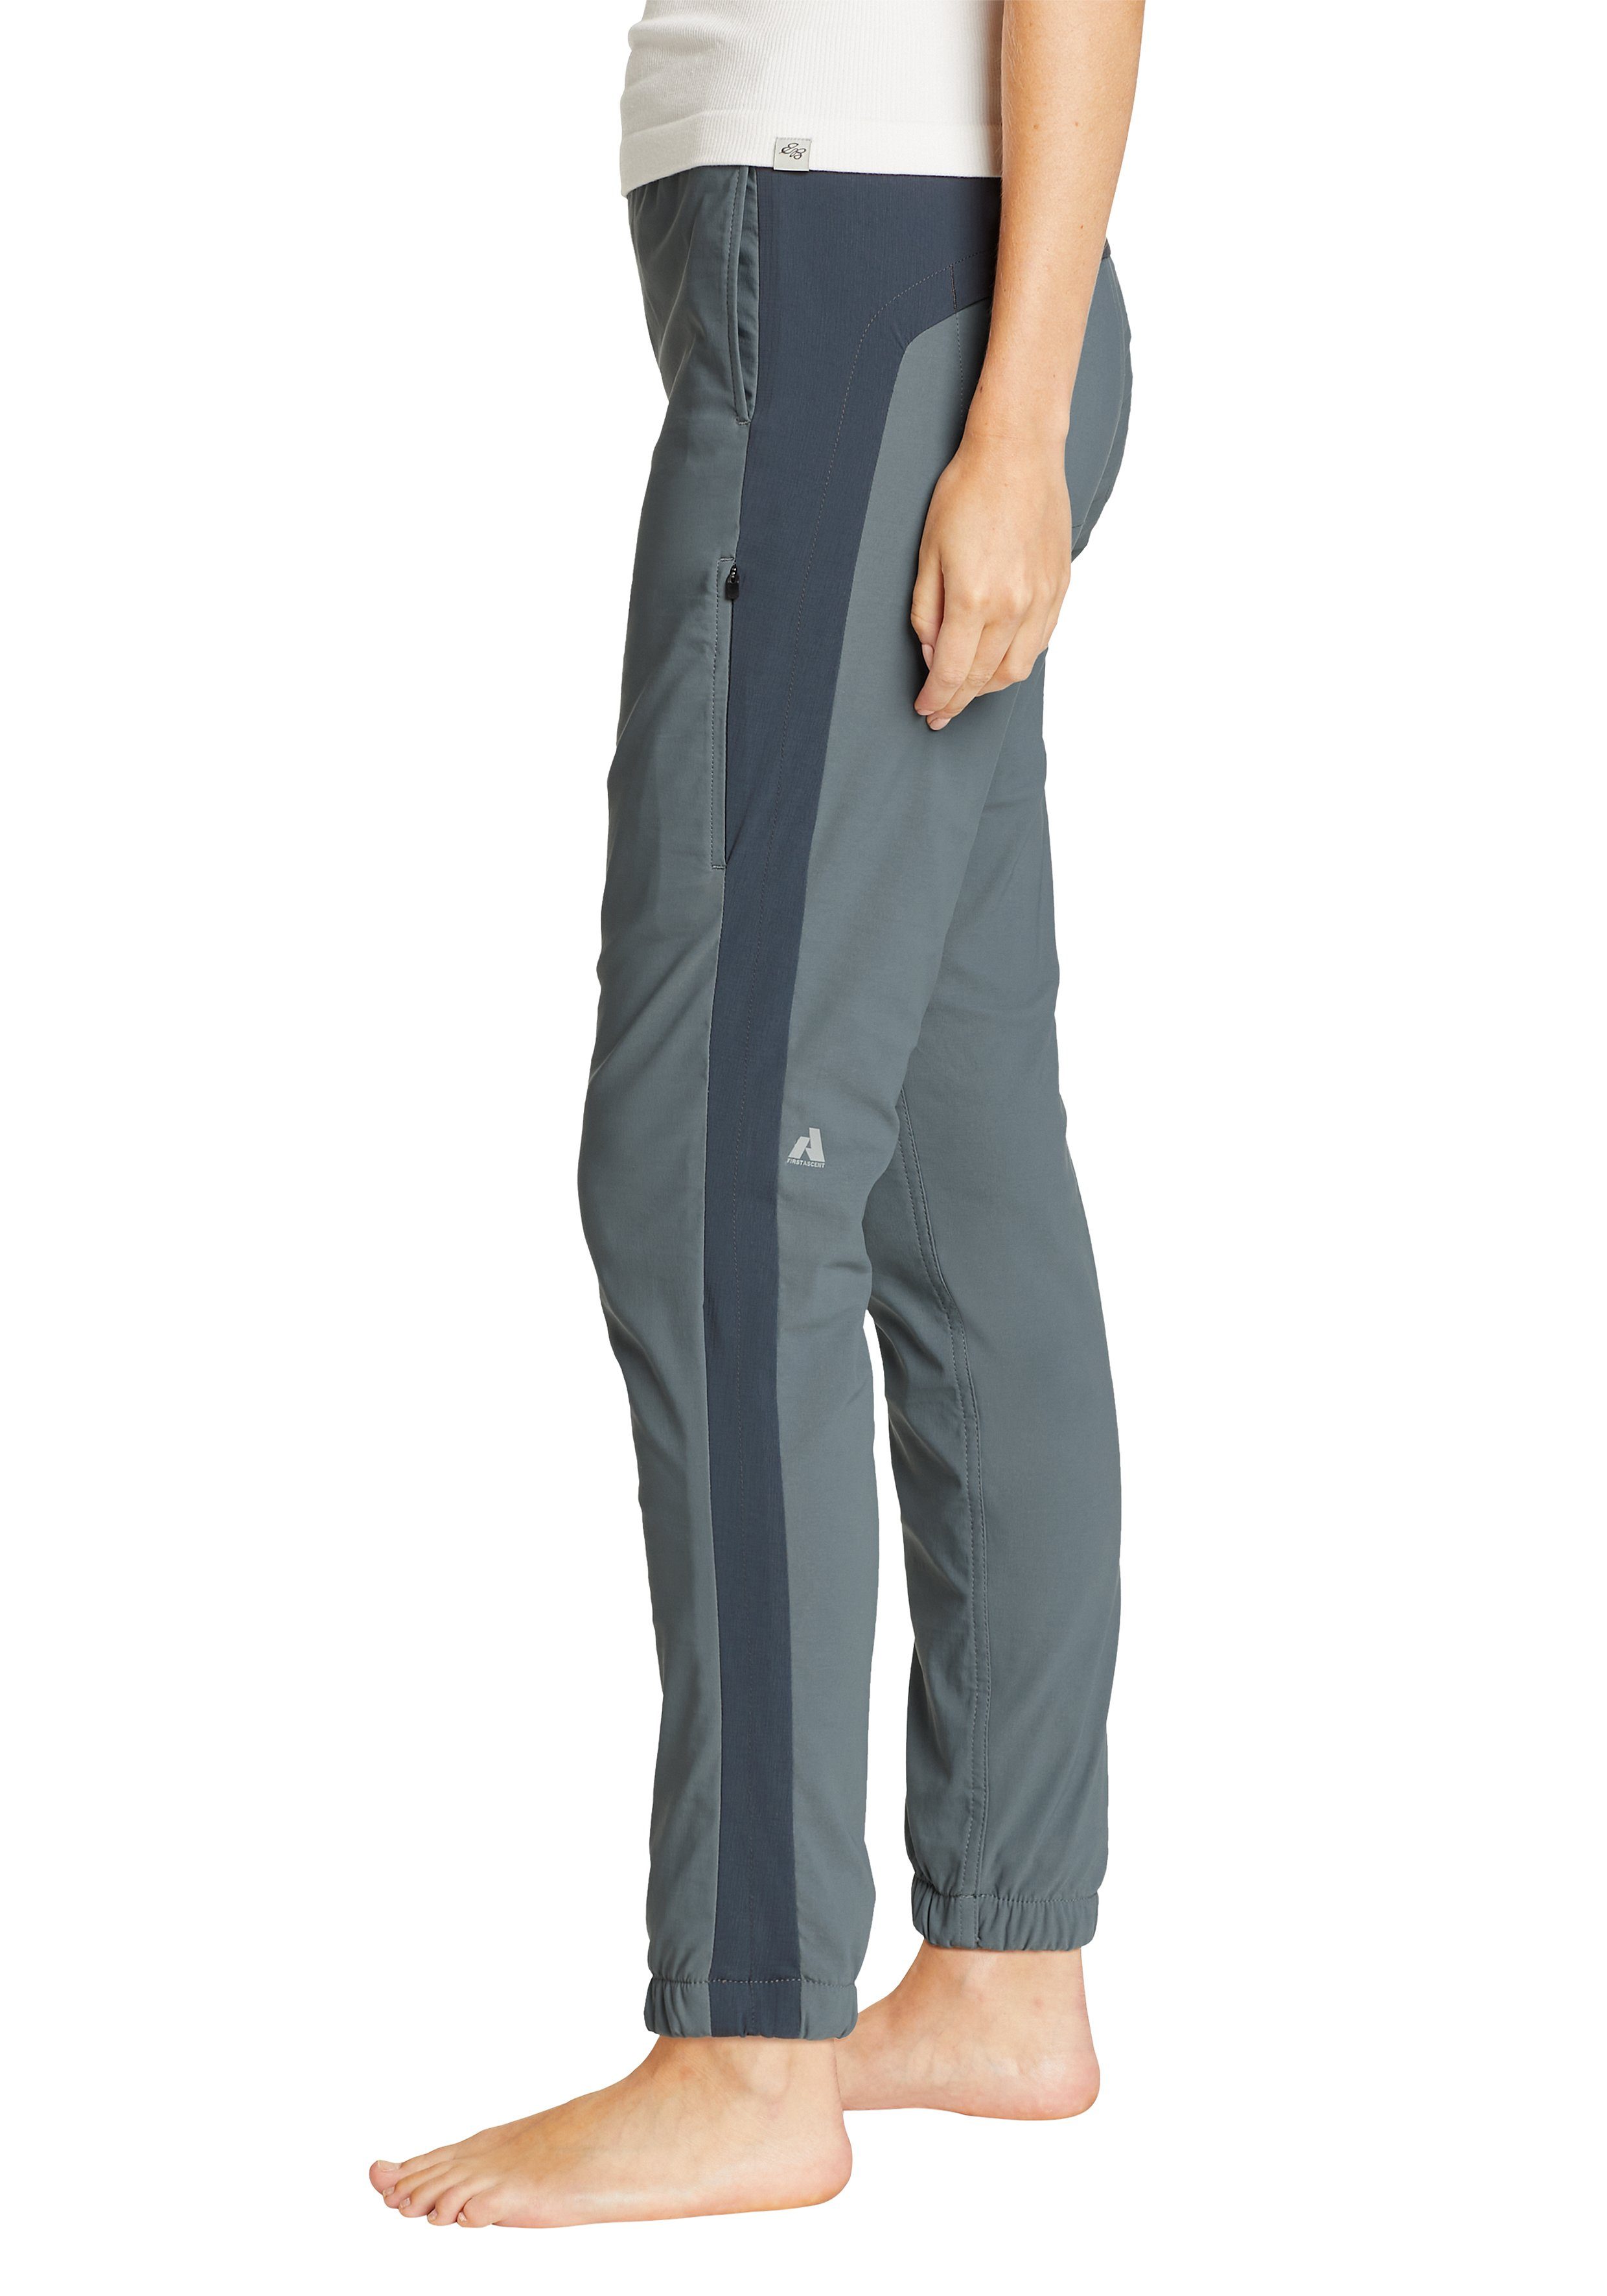 Eddie Bauer Jogger Pants - Pro Guide Graphit gefüttert Thermo Jogger